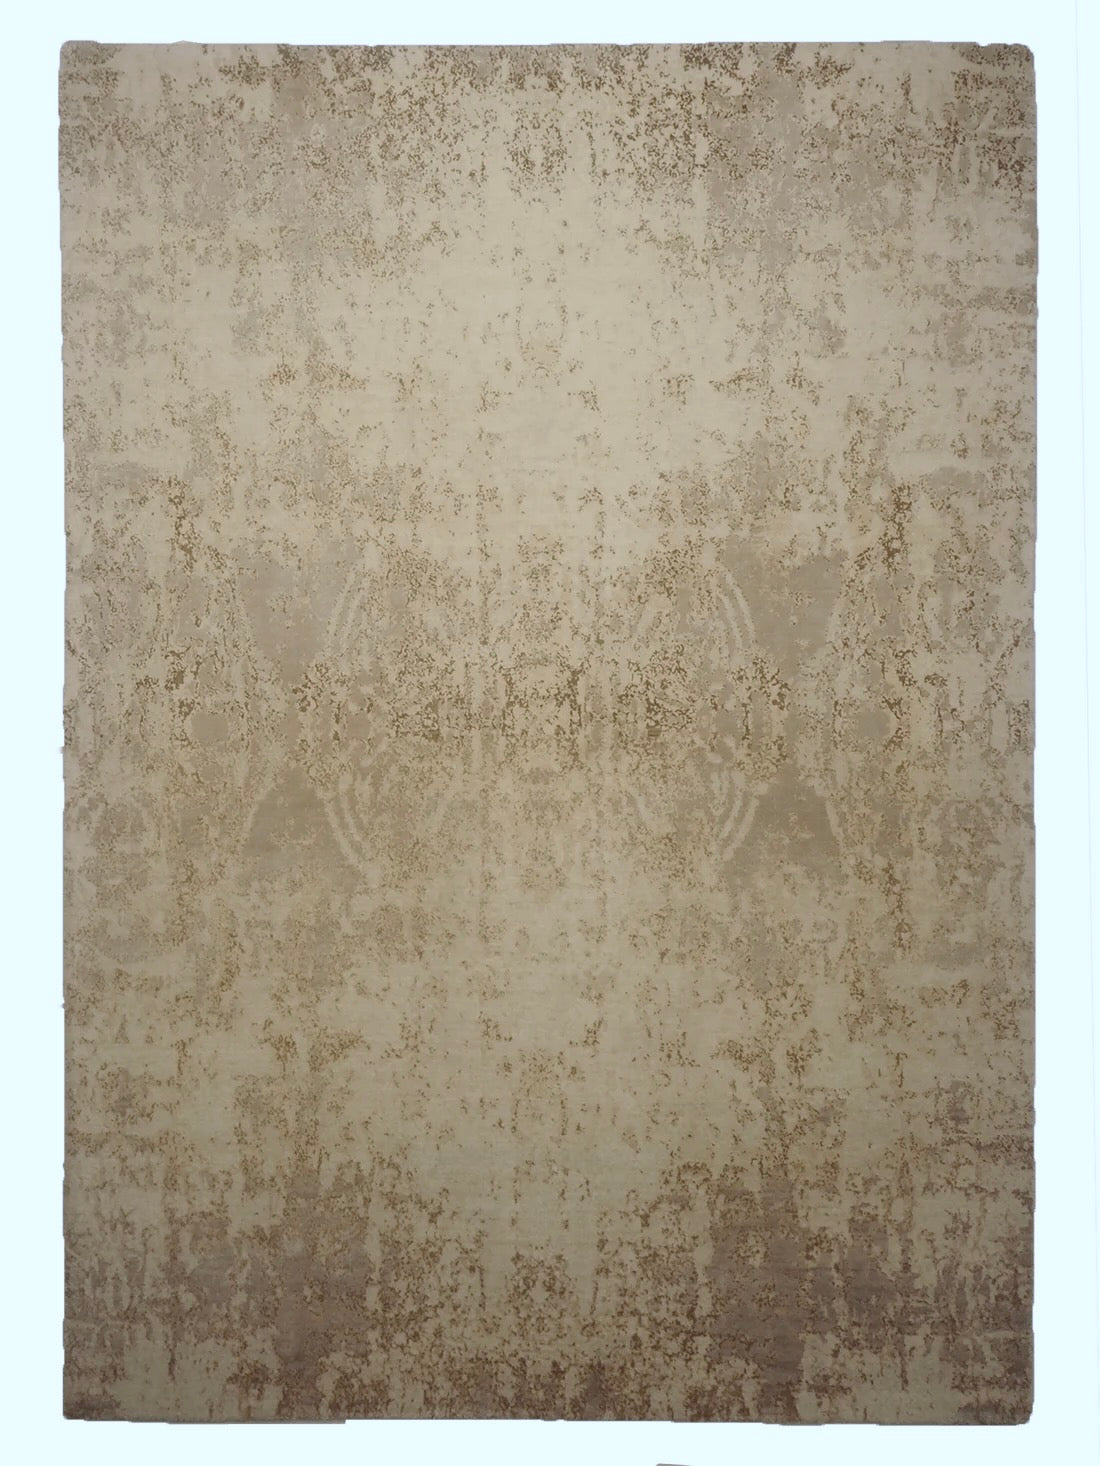 grey and taupe rug with an abstract damask pattern